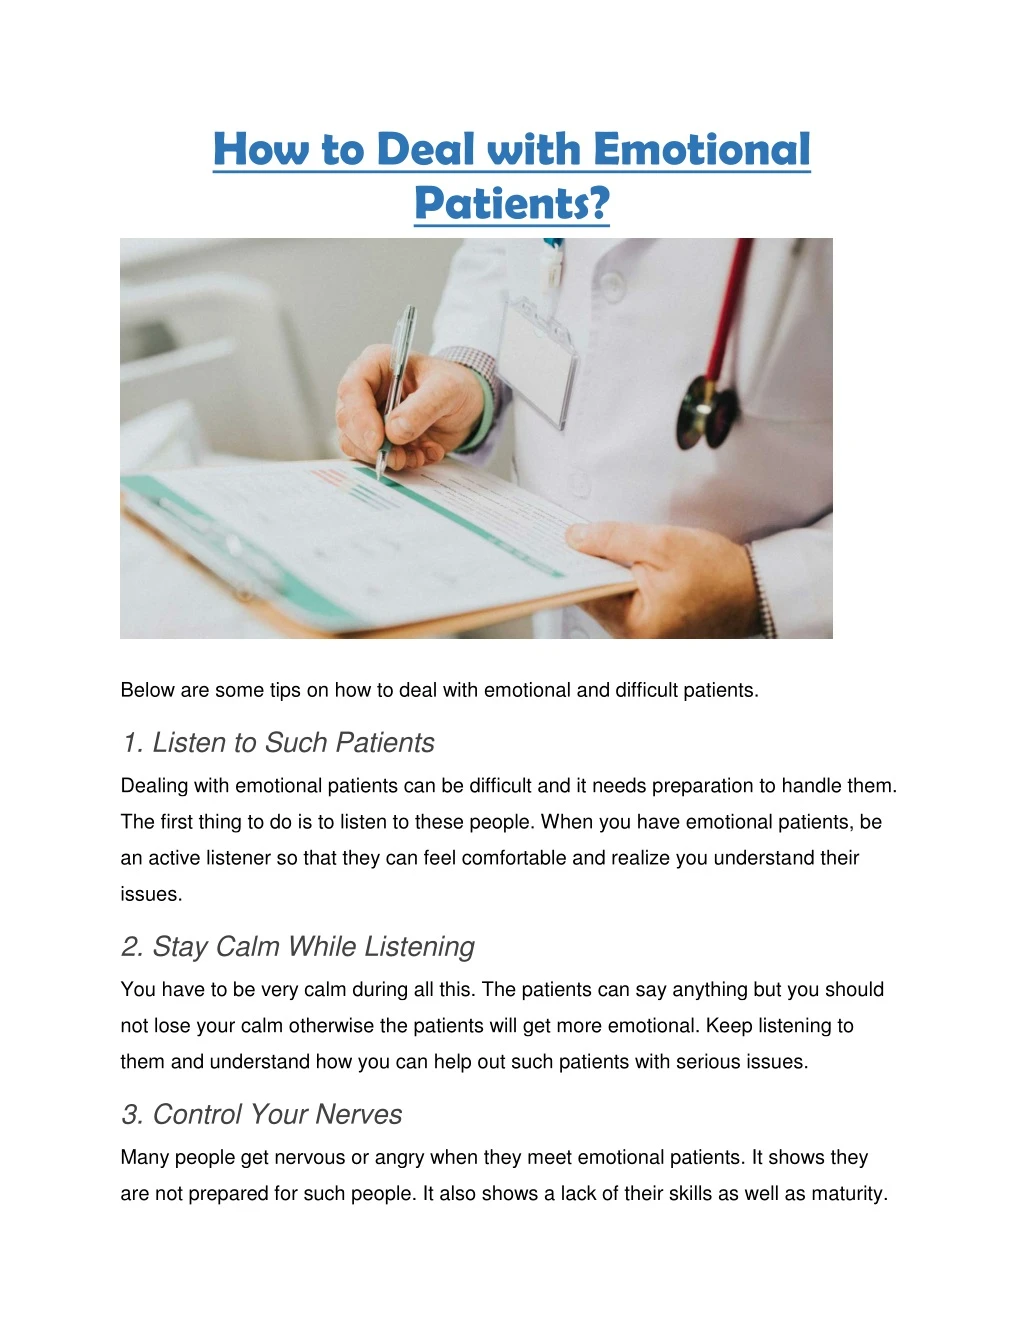 how to deal with emotional patients